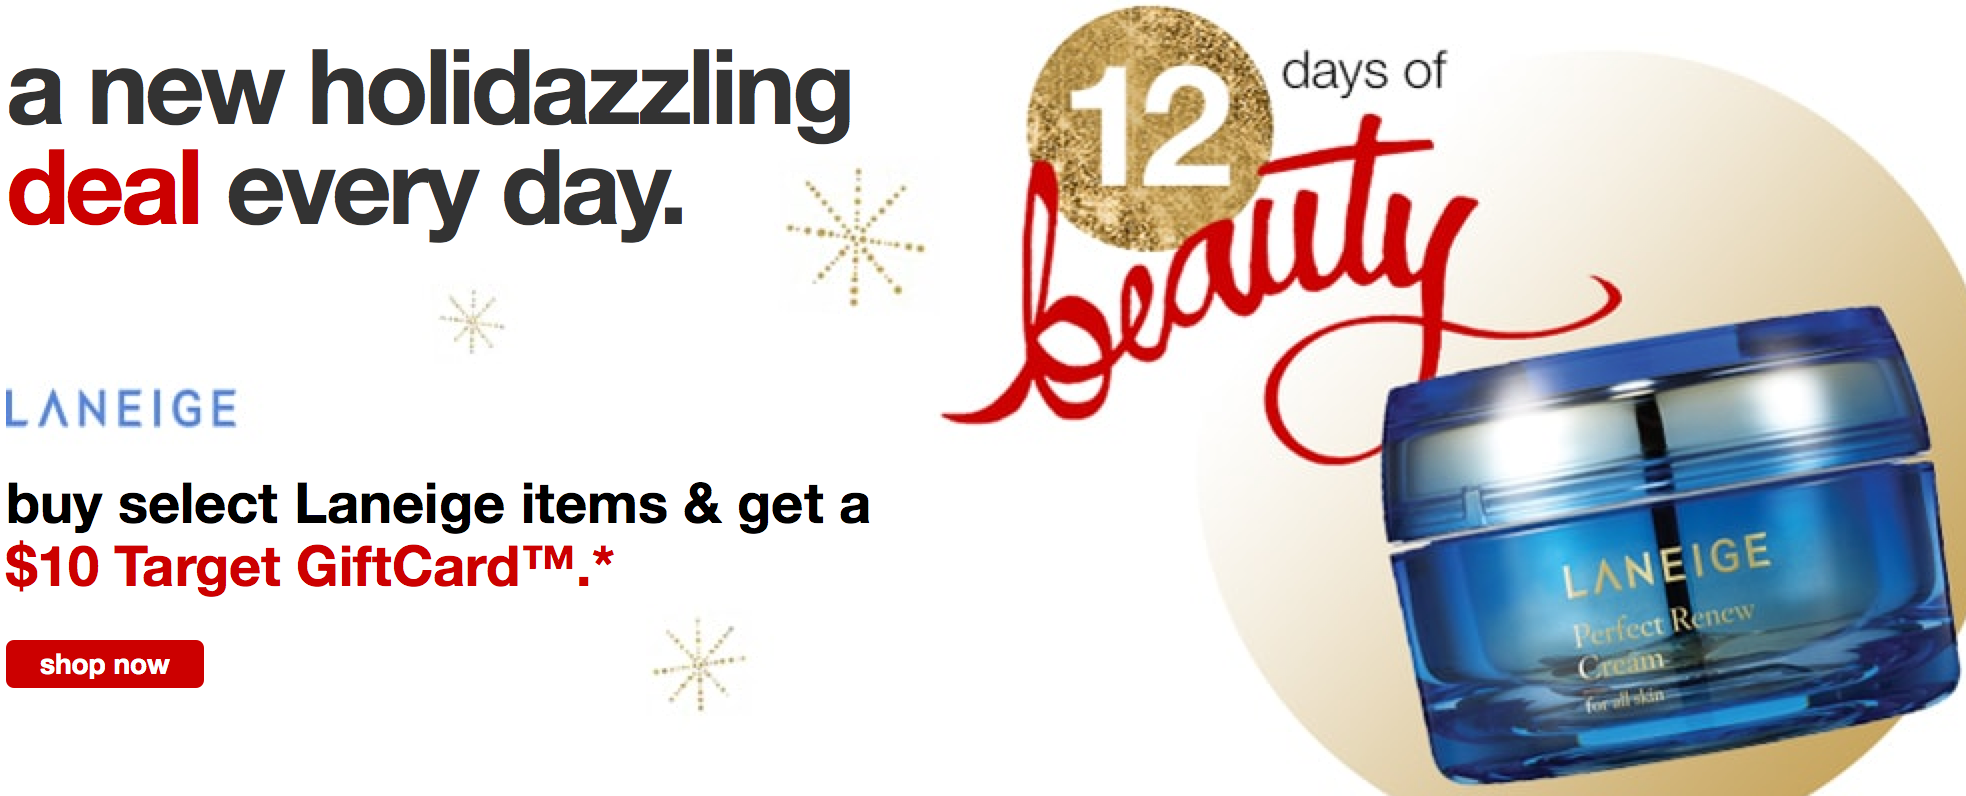 Target 12 Days of Beauty Promotion (Starting 12/6)